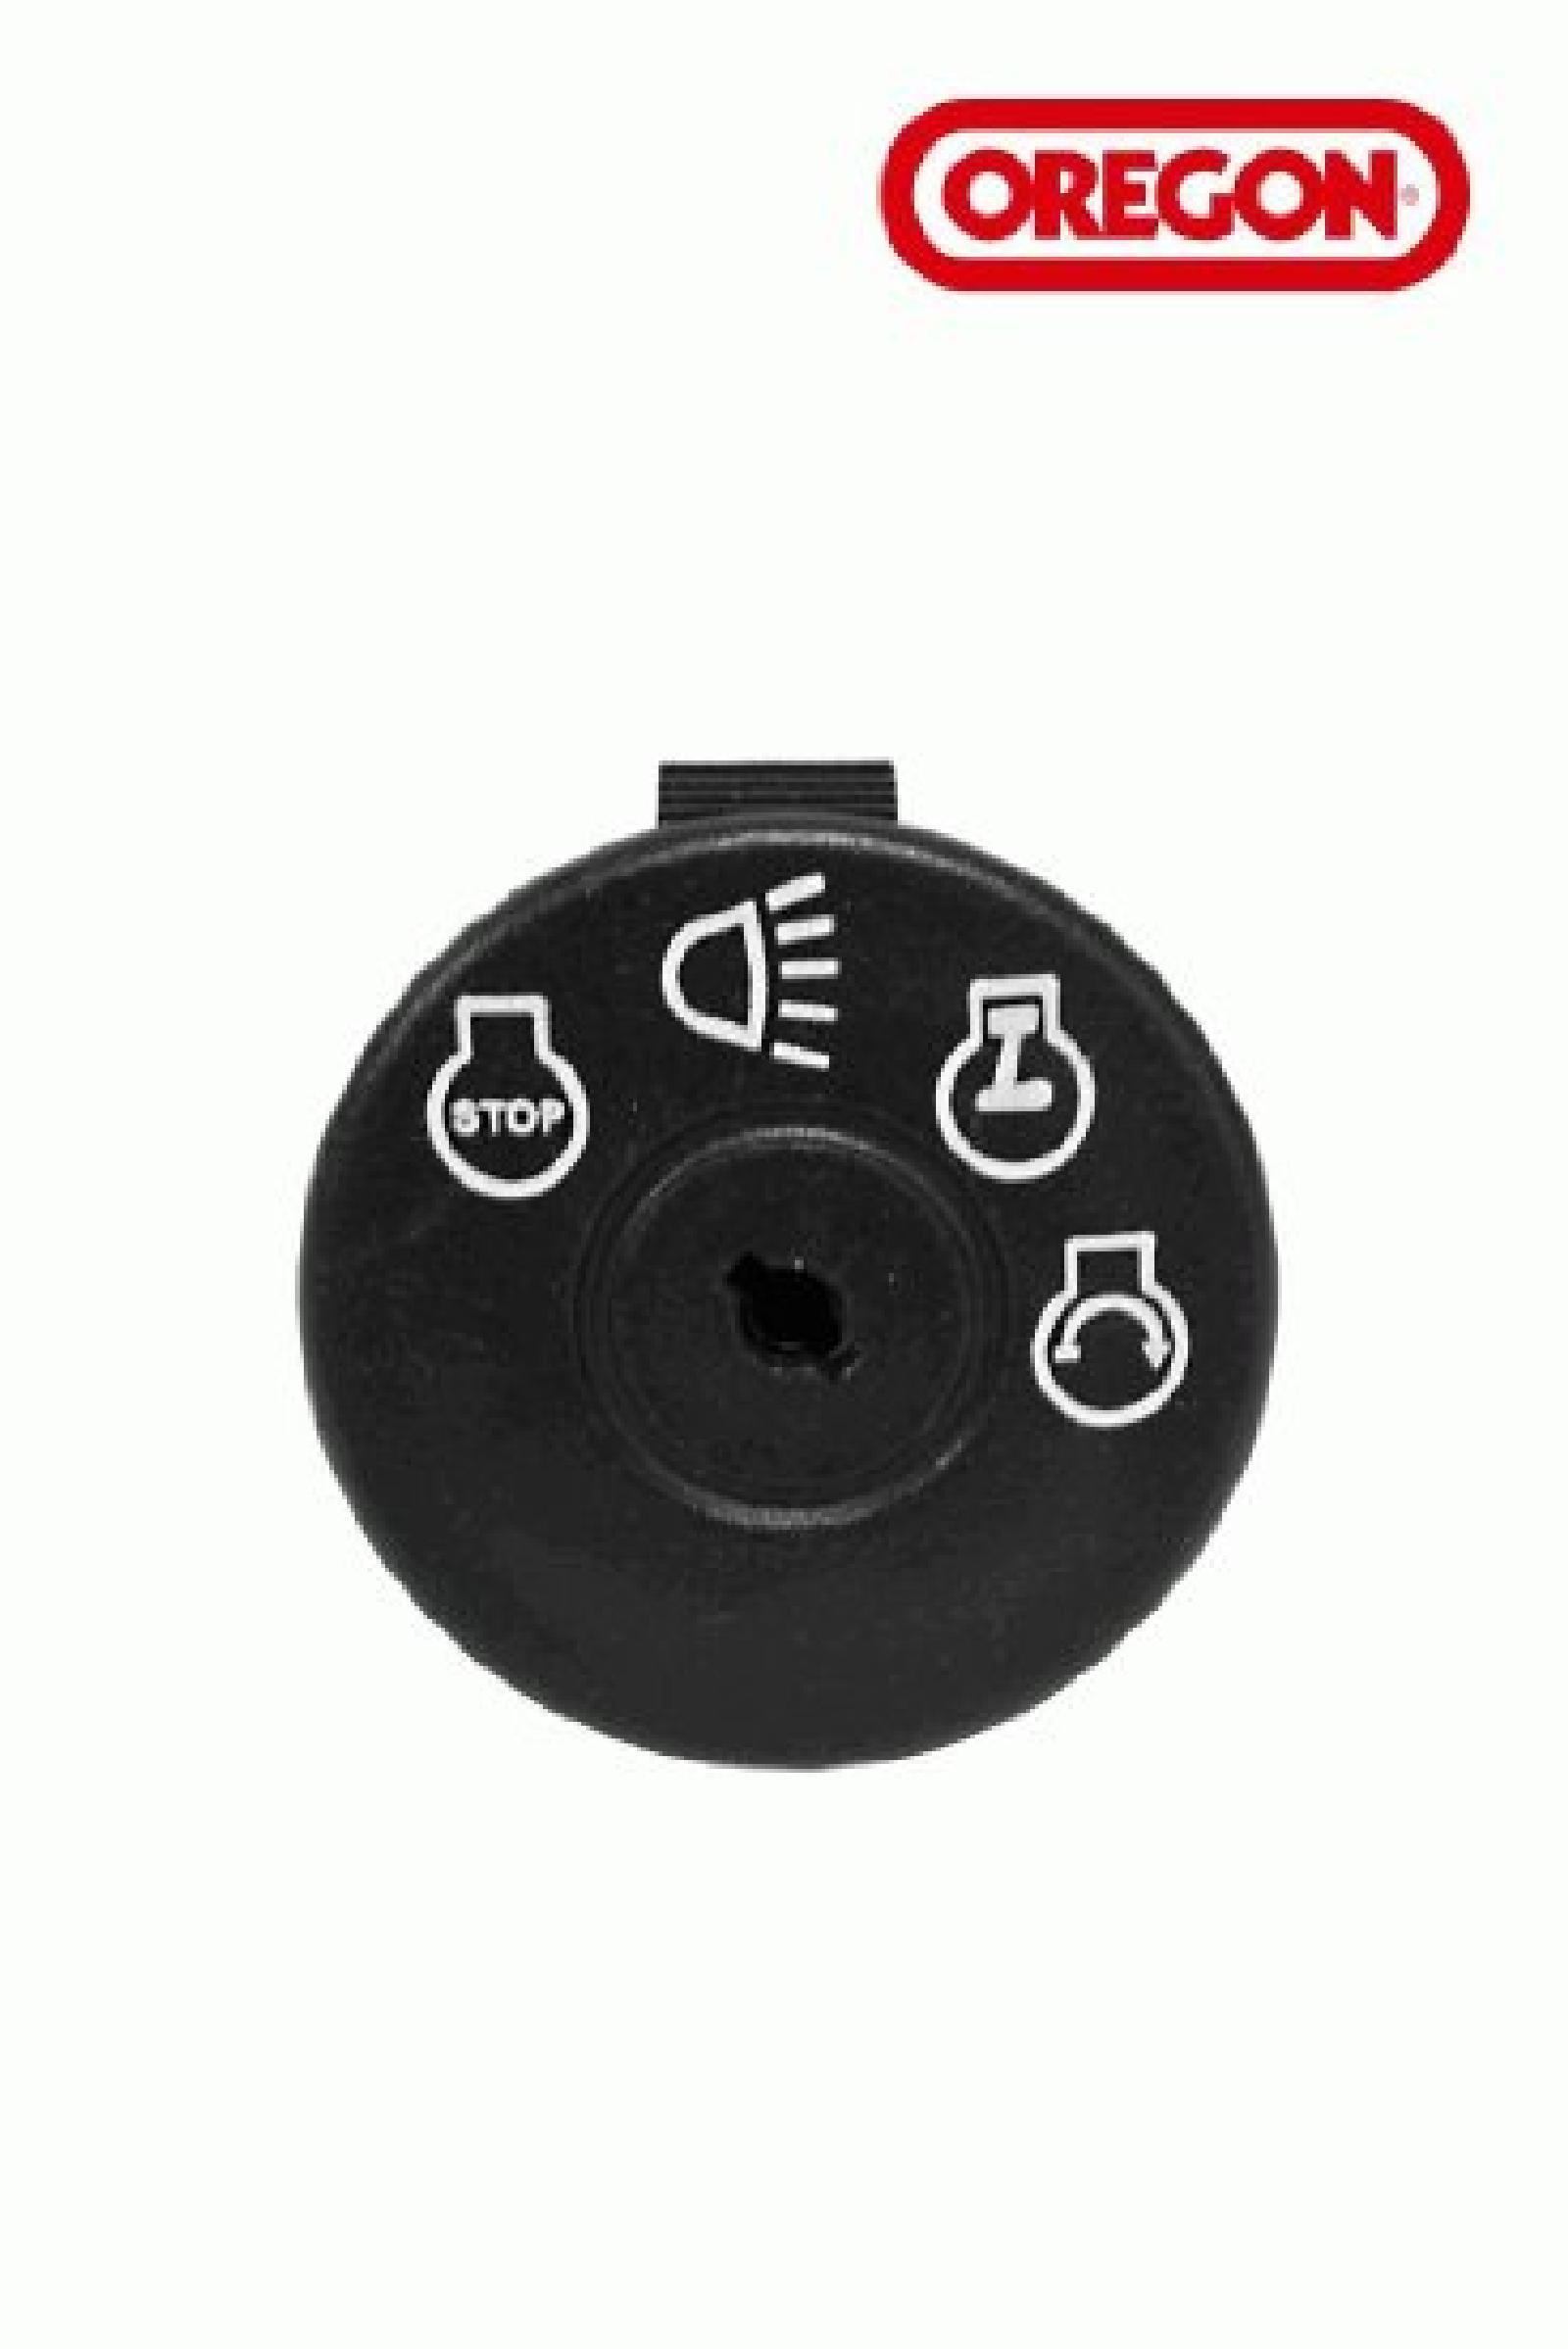 SWITCH IGNITION AYP 17556 part# 33-376 by Oregon - Click Image to Close